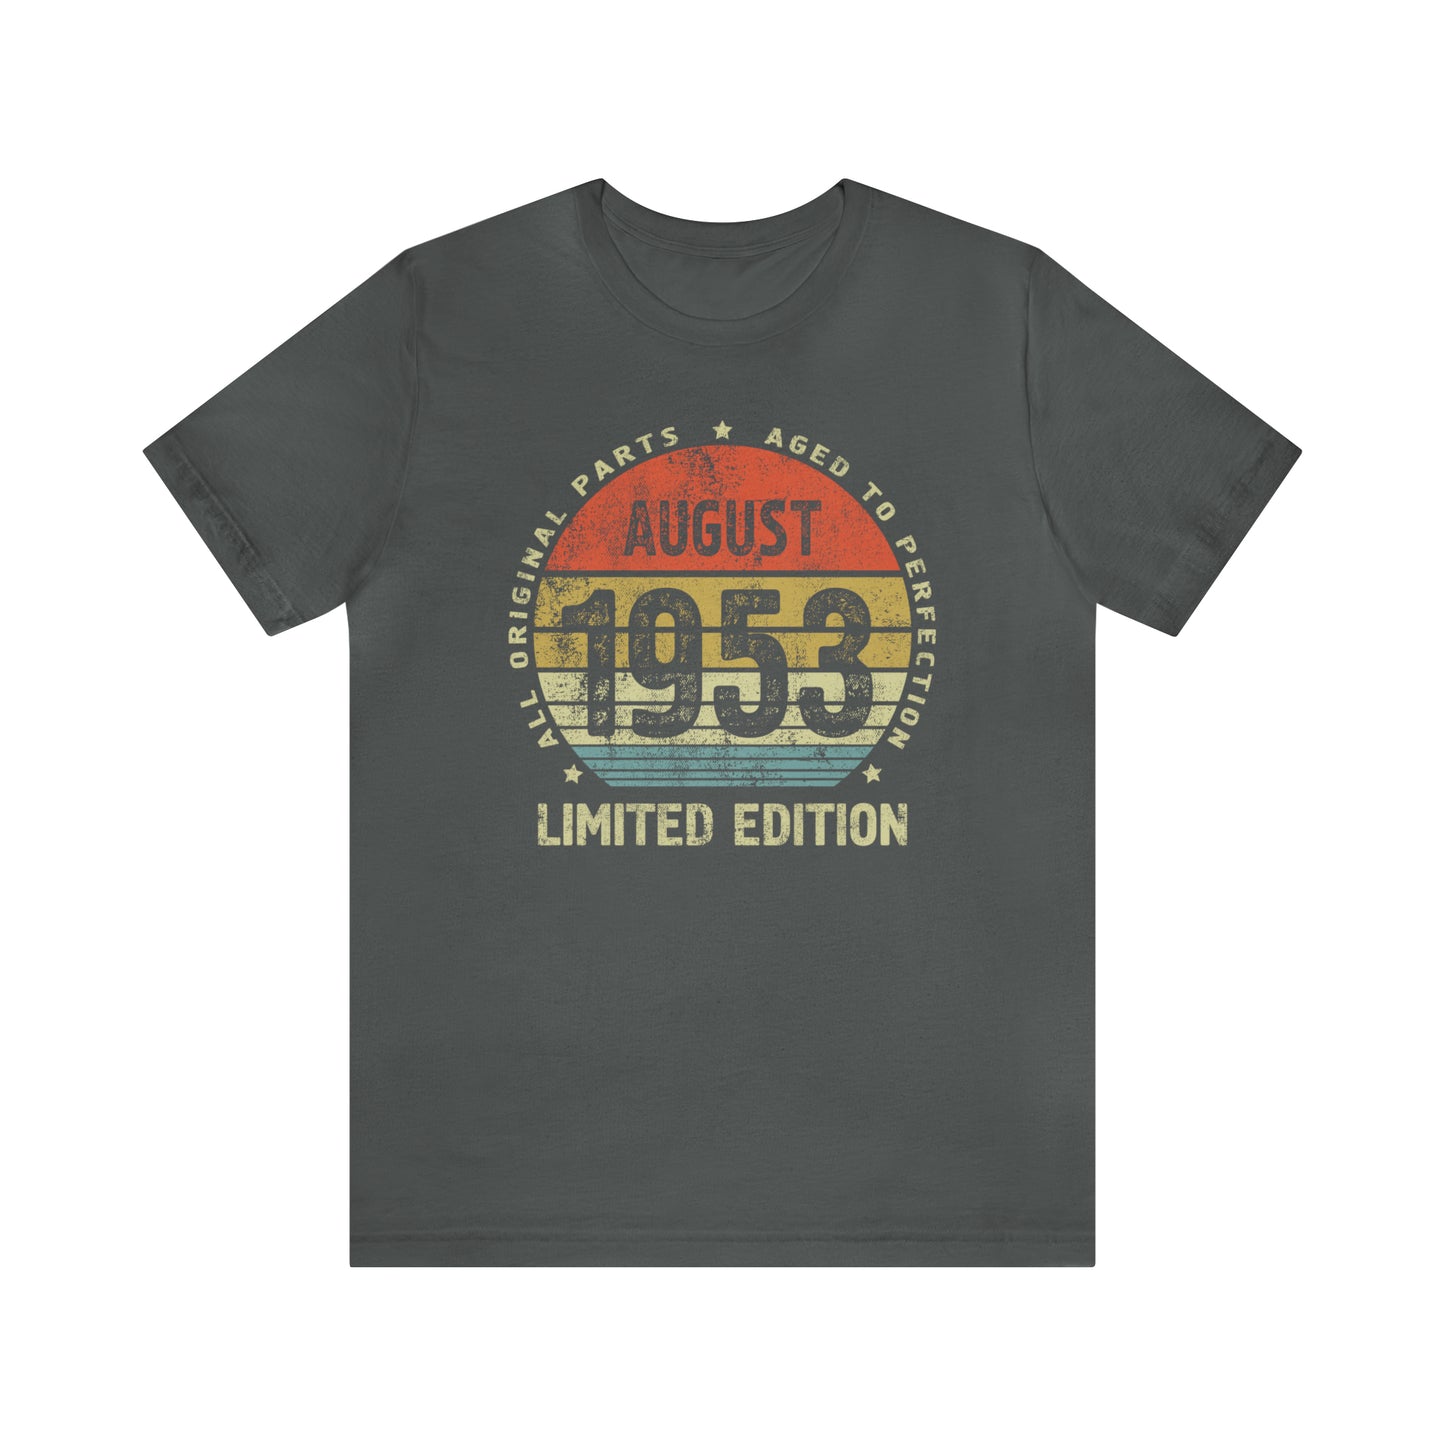 August 1953 birthday gift shirt for dad or mom, born in 1953 shirt for wife or husband